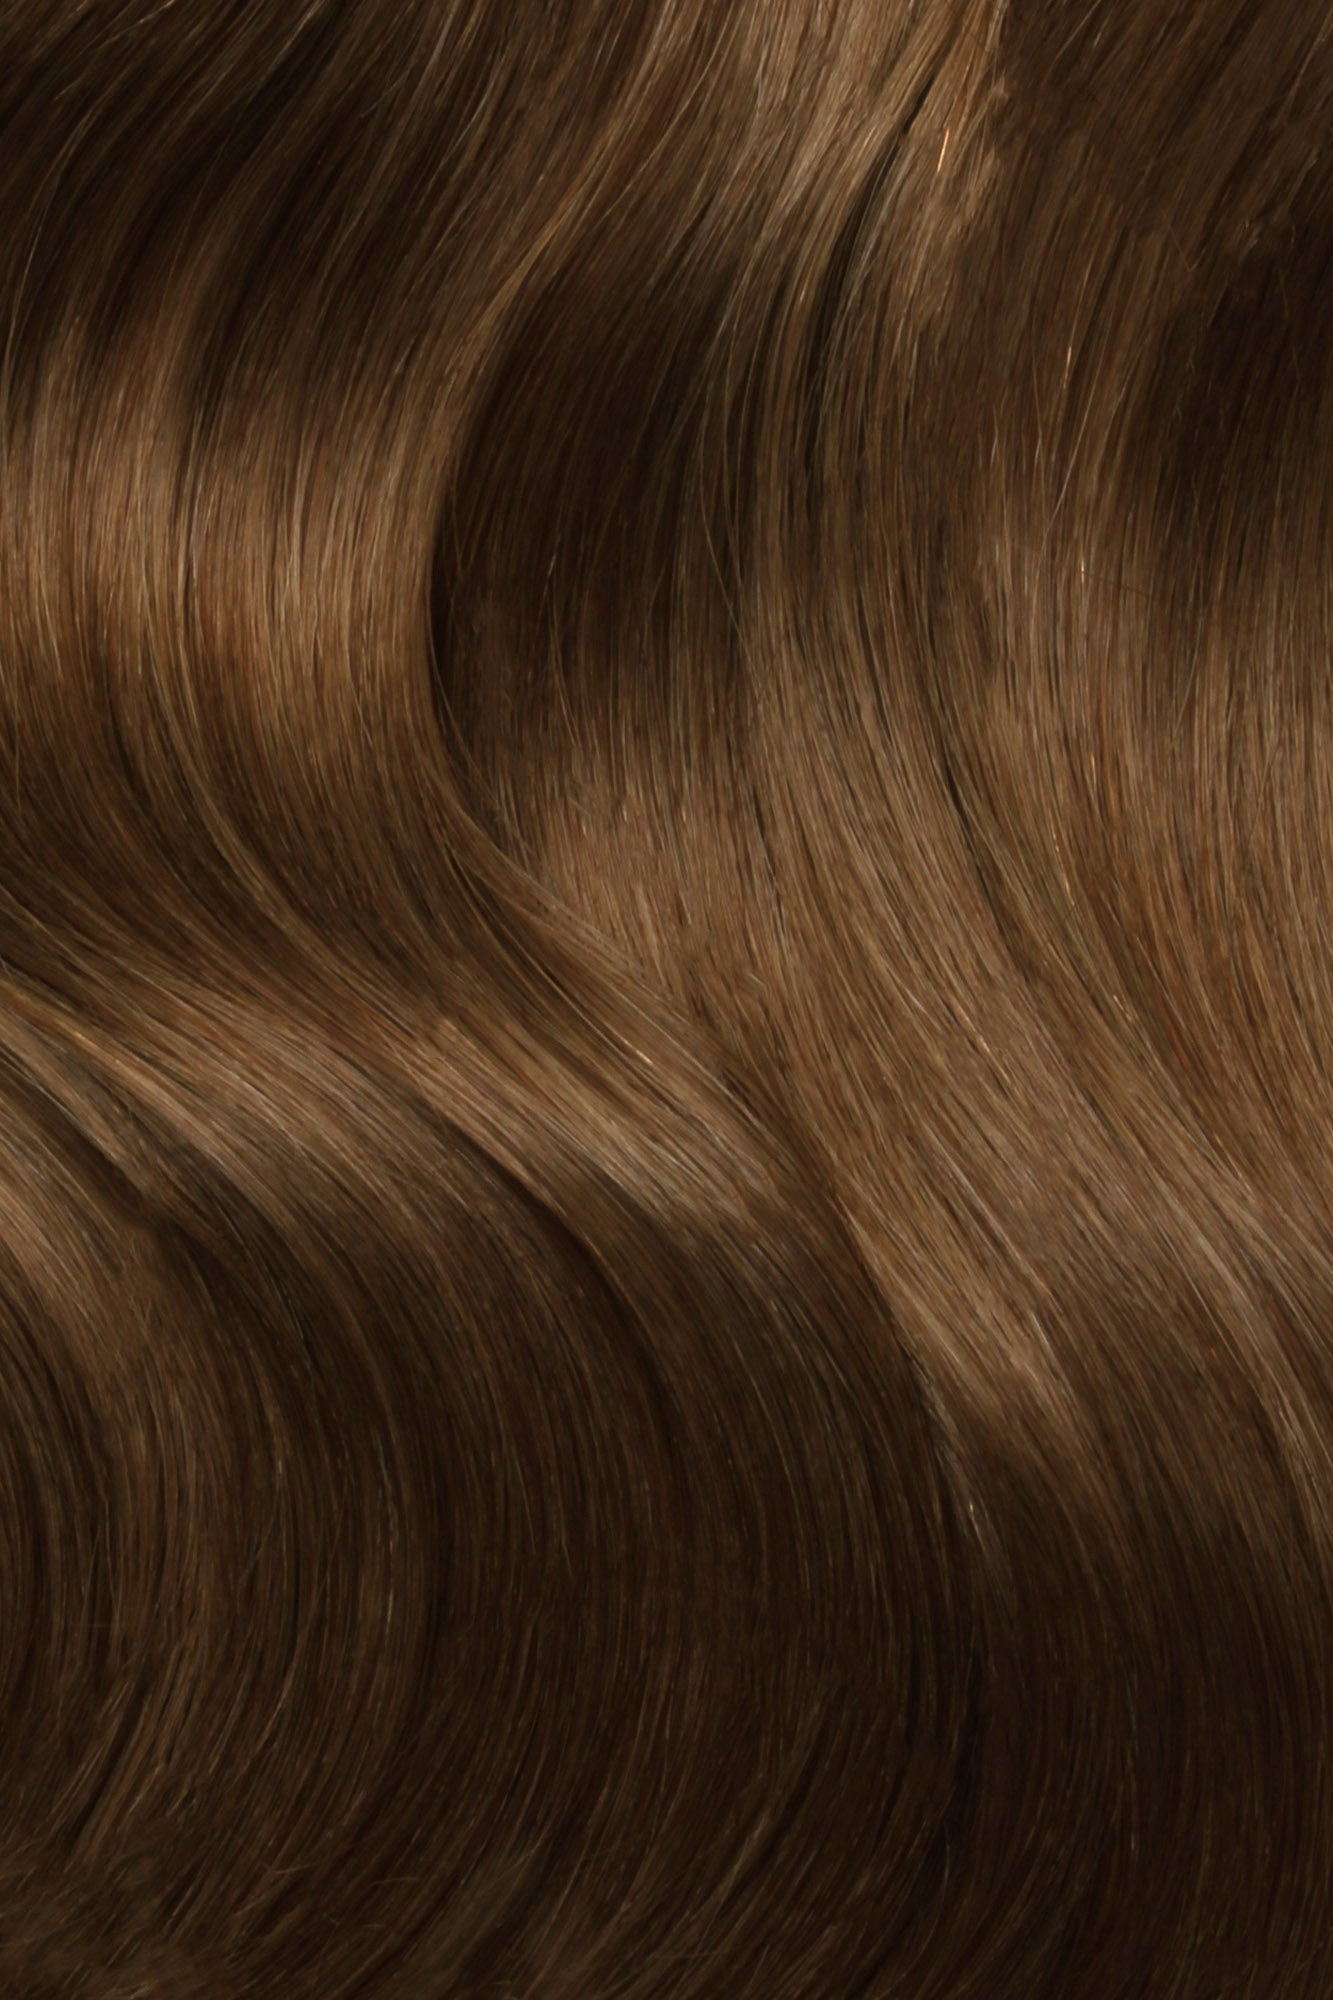 SEAMLESS® Flat Weft 16 Inches - SWAY Hair Extensions Chestnut-Brown-4 Natural SEAMLESS® Flat Weft 16 Inches extensions. Thin, flexible, and discreet. 100% Double Drawn Remy Human Hair. Versatile and reusable